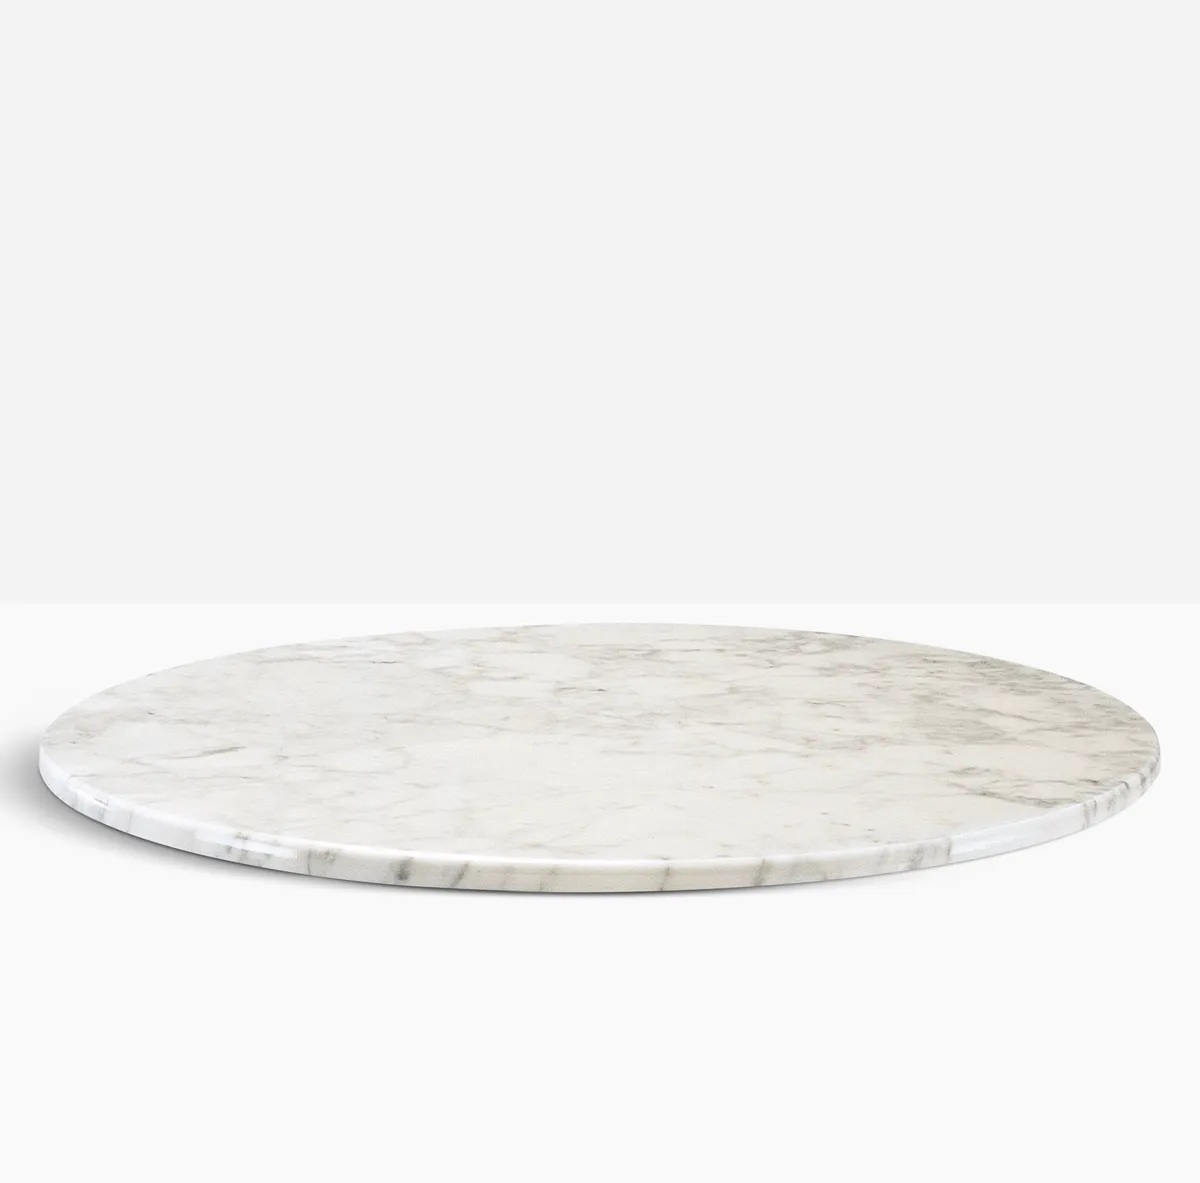 Marble Mbc Ped Table Top 20Mmthickness